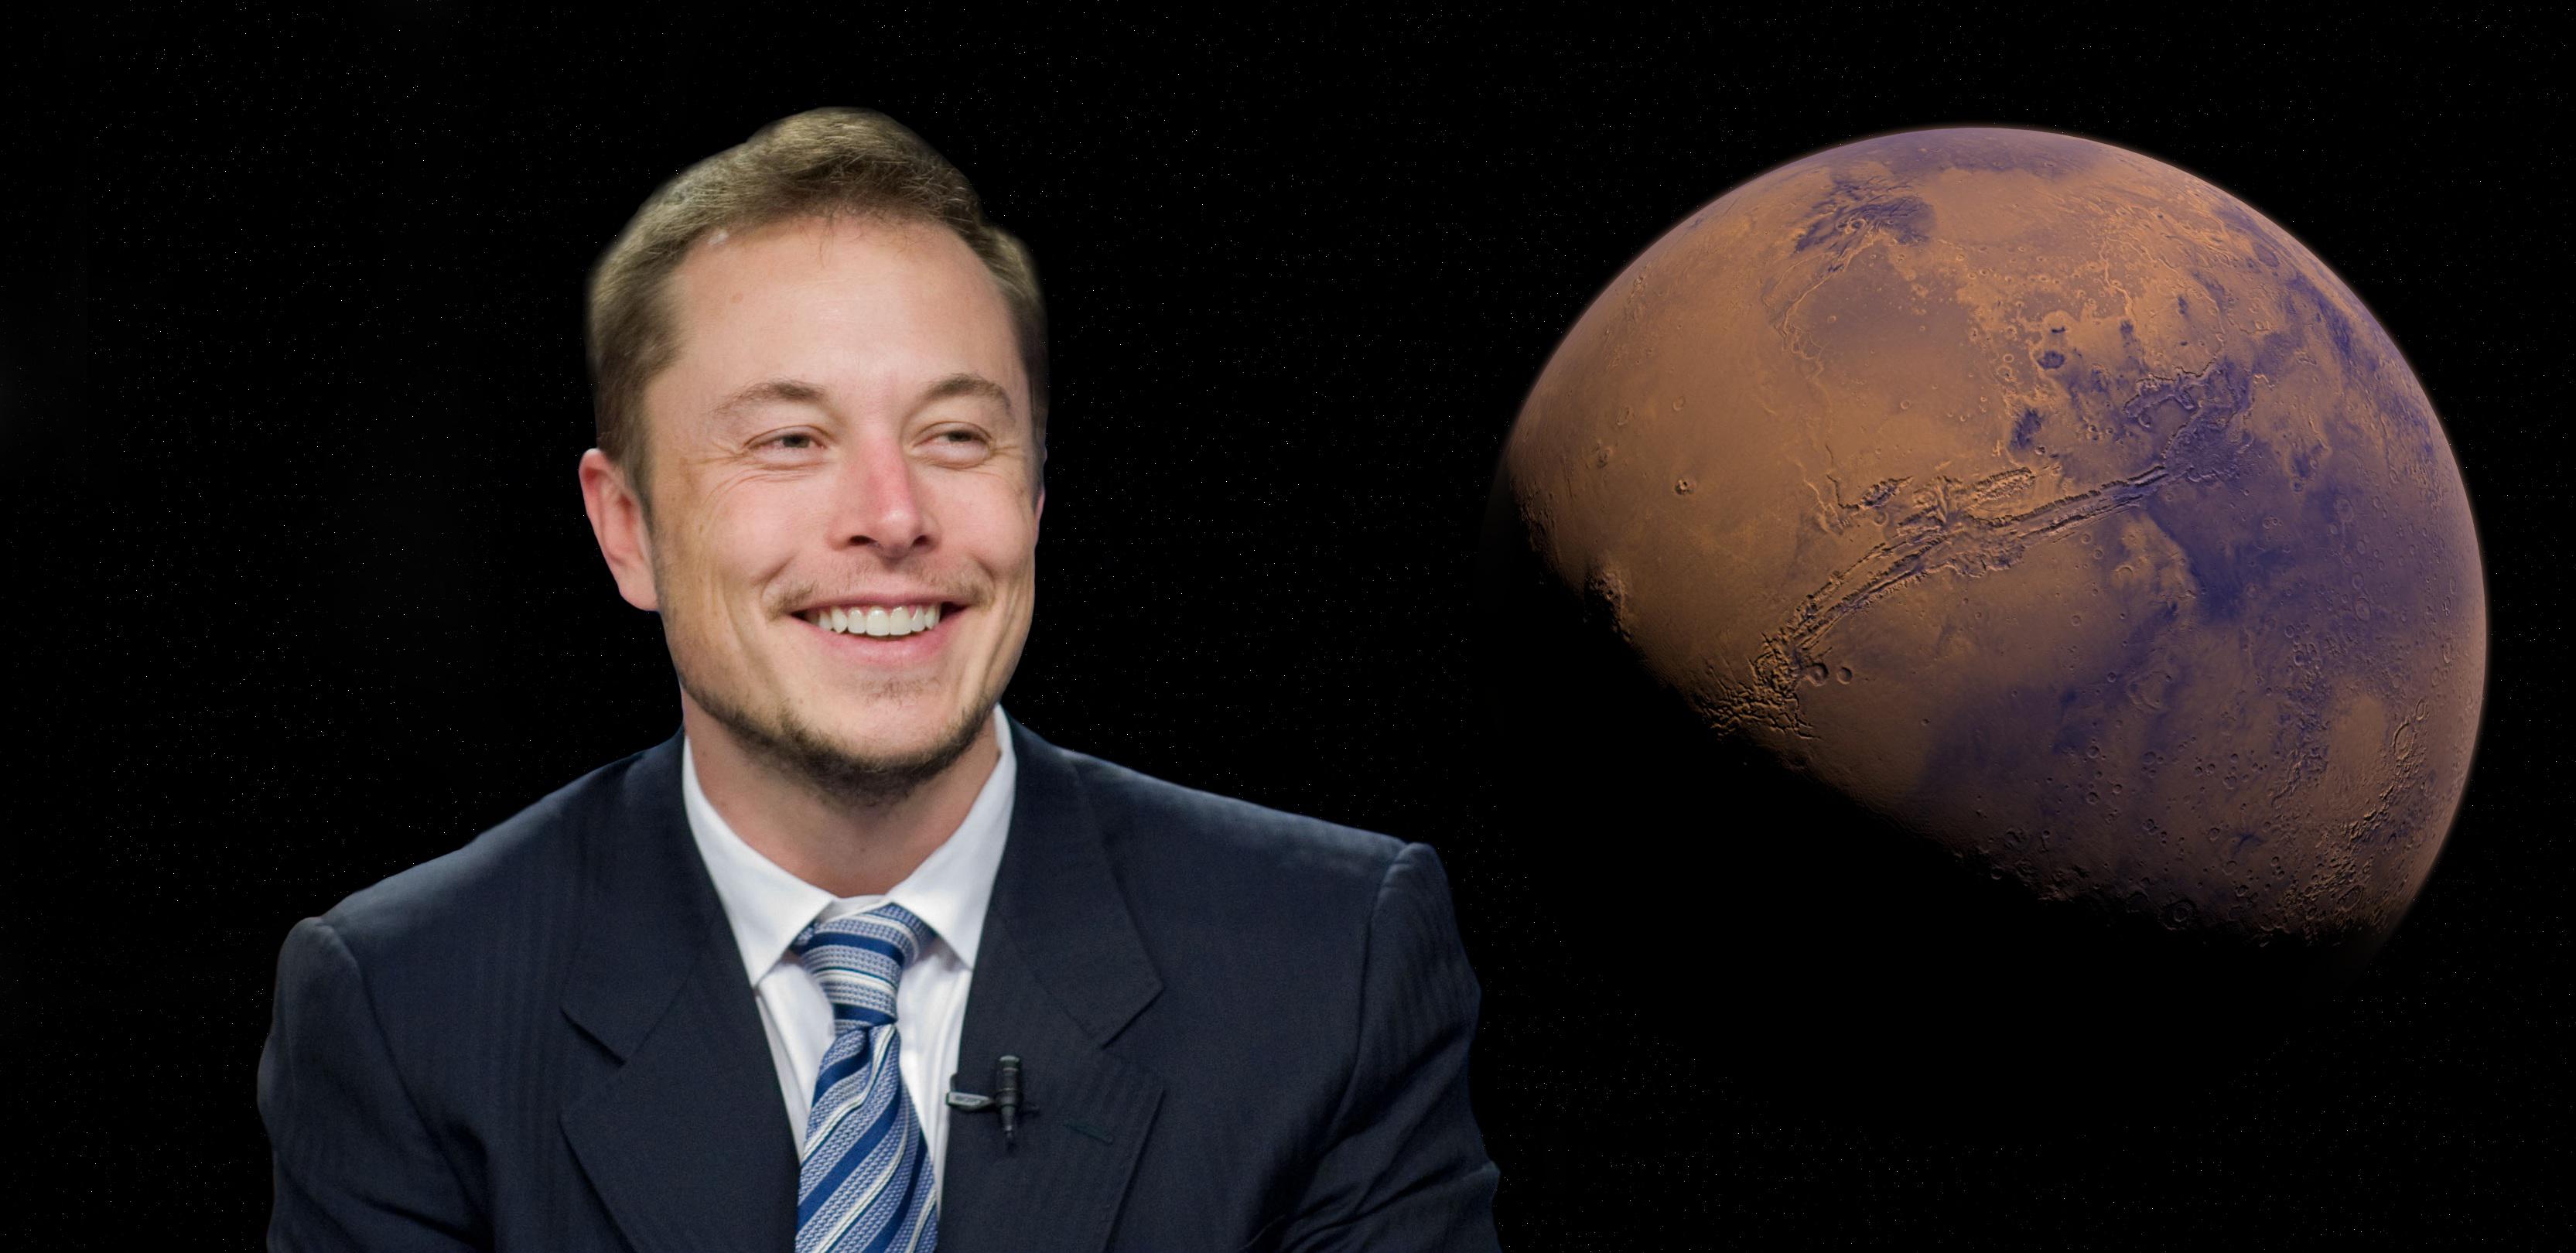 Who is Elon Musk? How he became the richest person in the World? - BlogsSoft